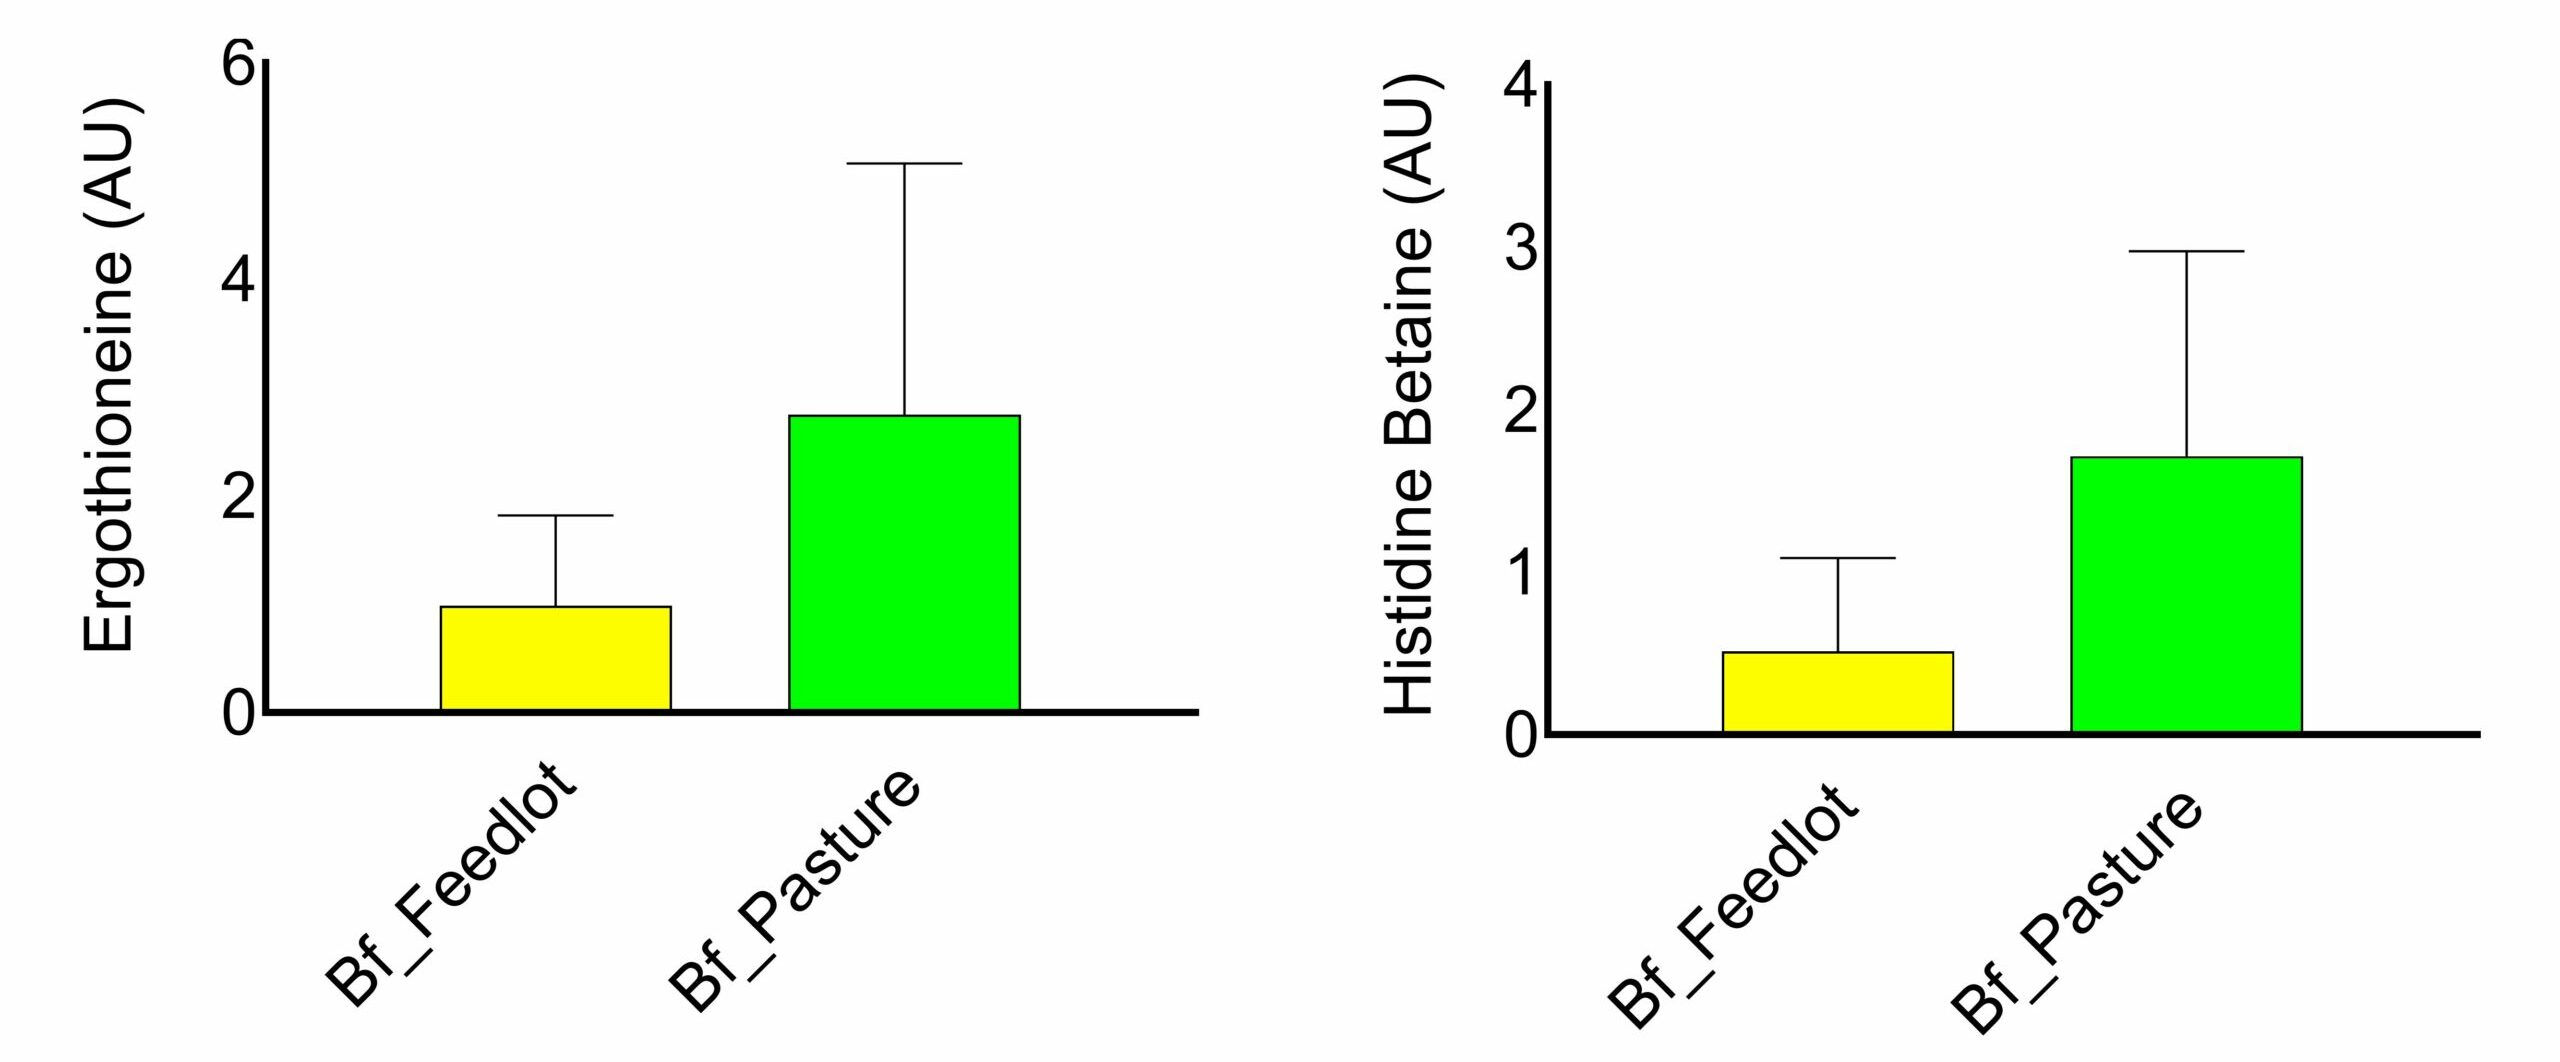 Figure 6: Ergothioneine and histidine betaine content of feedlot and pasture-finished beef. These compounds, with potential anti-inflammatory and anti-oxidant effects, are produced by soil bacteria and upcycled in the meat. 